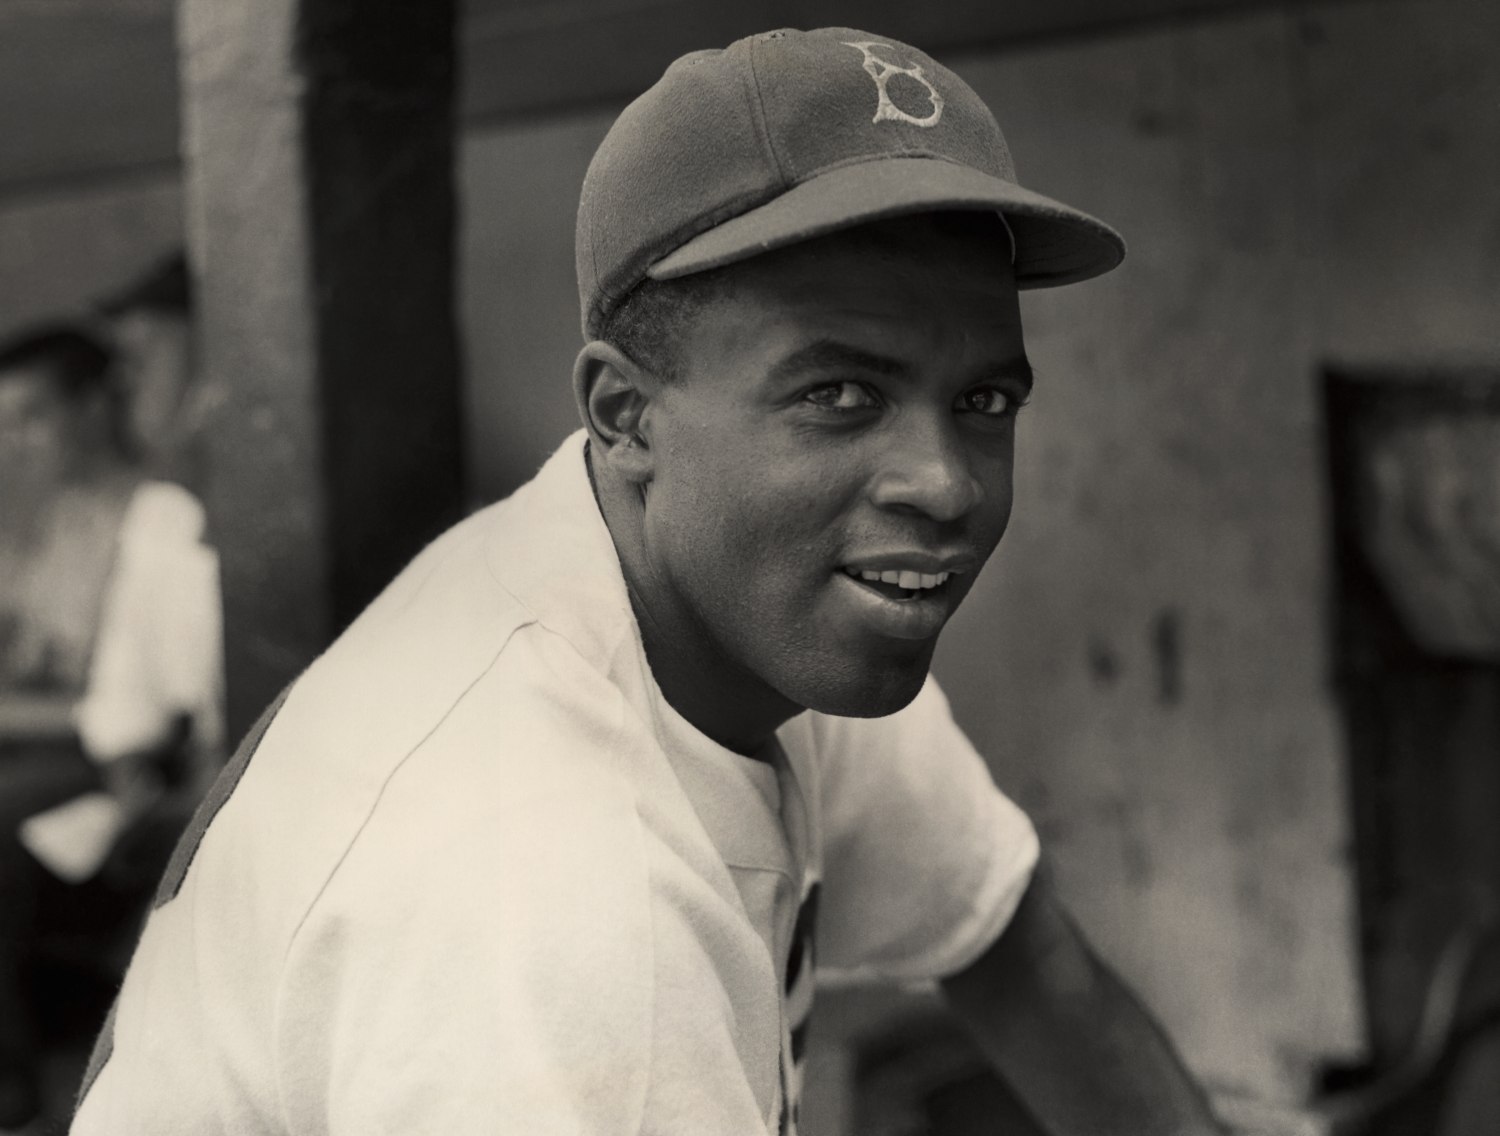 What Really Happened to Ben Chapman, the Racist Baseball Player in